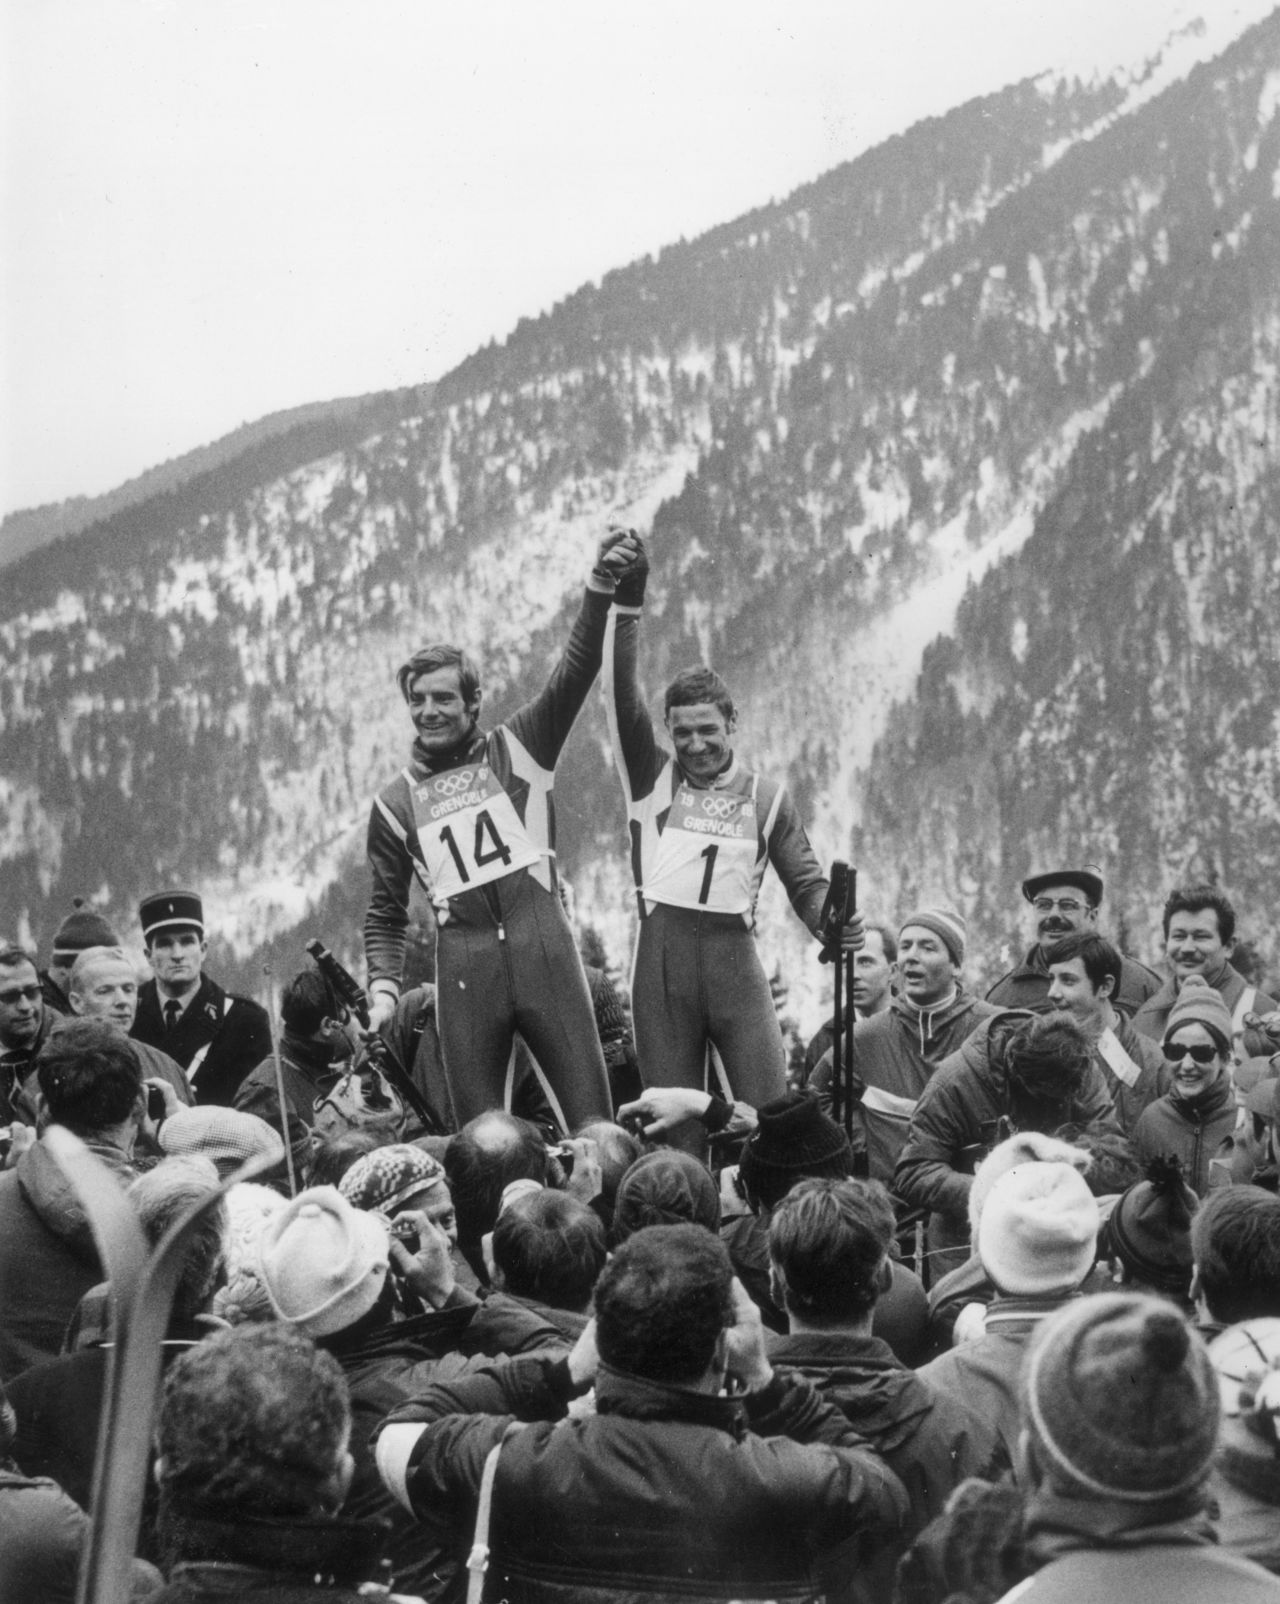 Killy (left) won all three disciplines at the 1968 Winter Olympics (downhill, giant slalom, and slalom) but retired at the age of 24. Like Oreiller, Killy tried his hand at motor racing, competing in the Paris-Dakar rally.